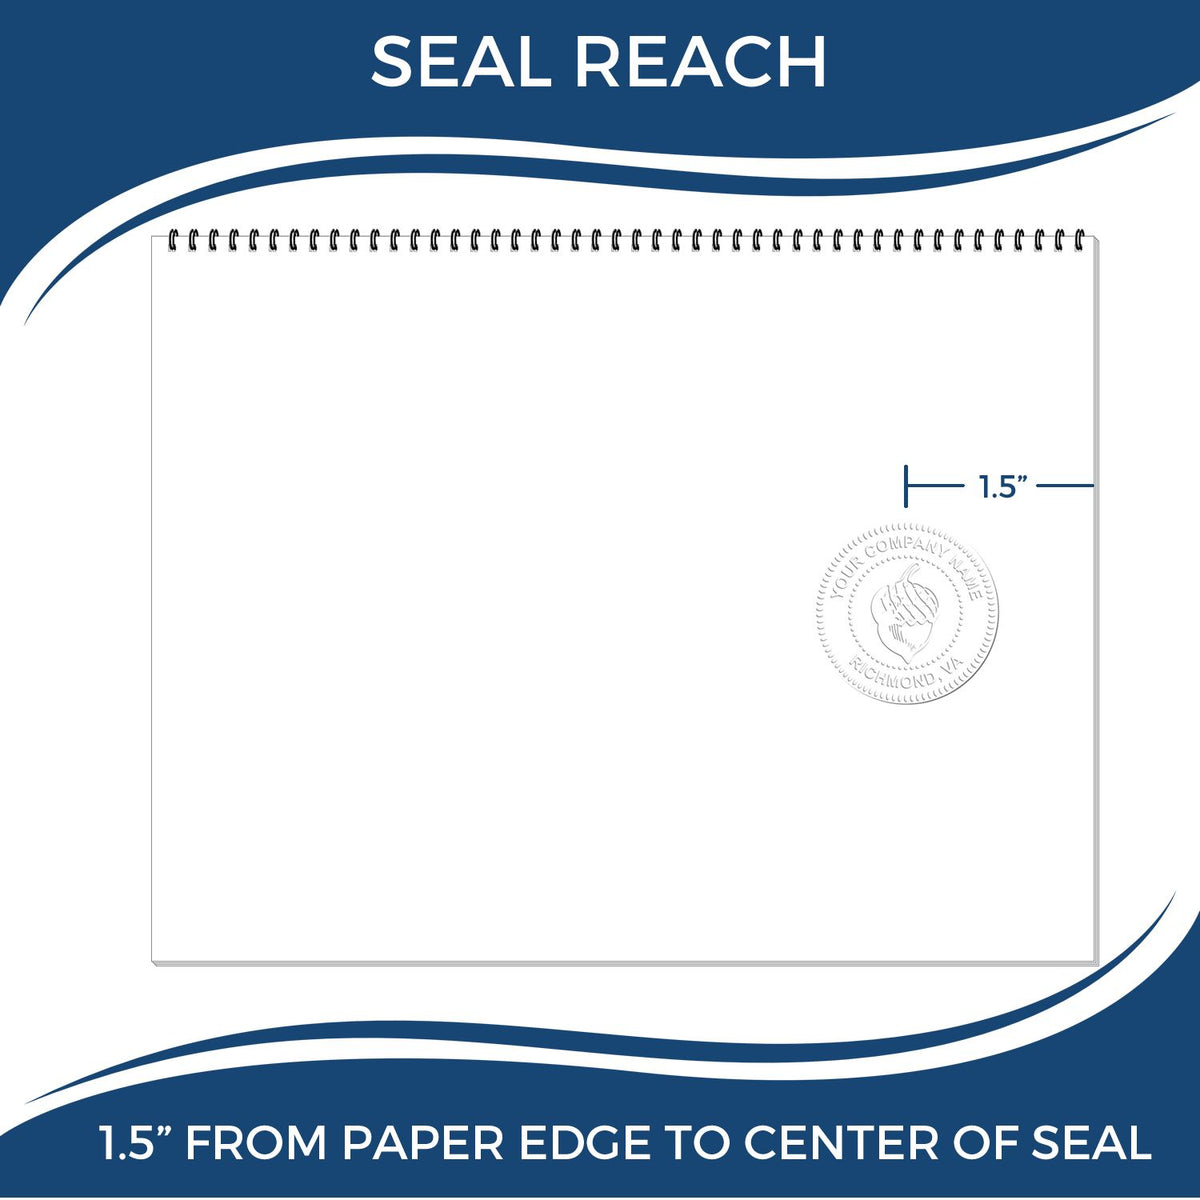 An infographic showing the seal reach which is represented by a ruler and a miniature seal image of the Hybrid Illinois Geologist Seal